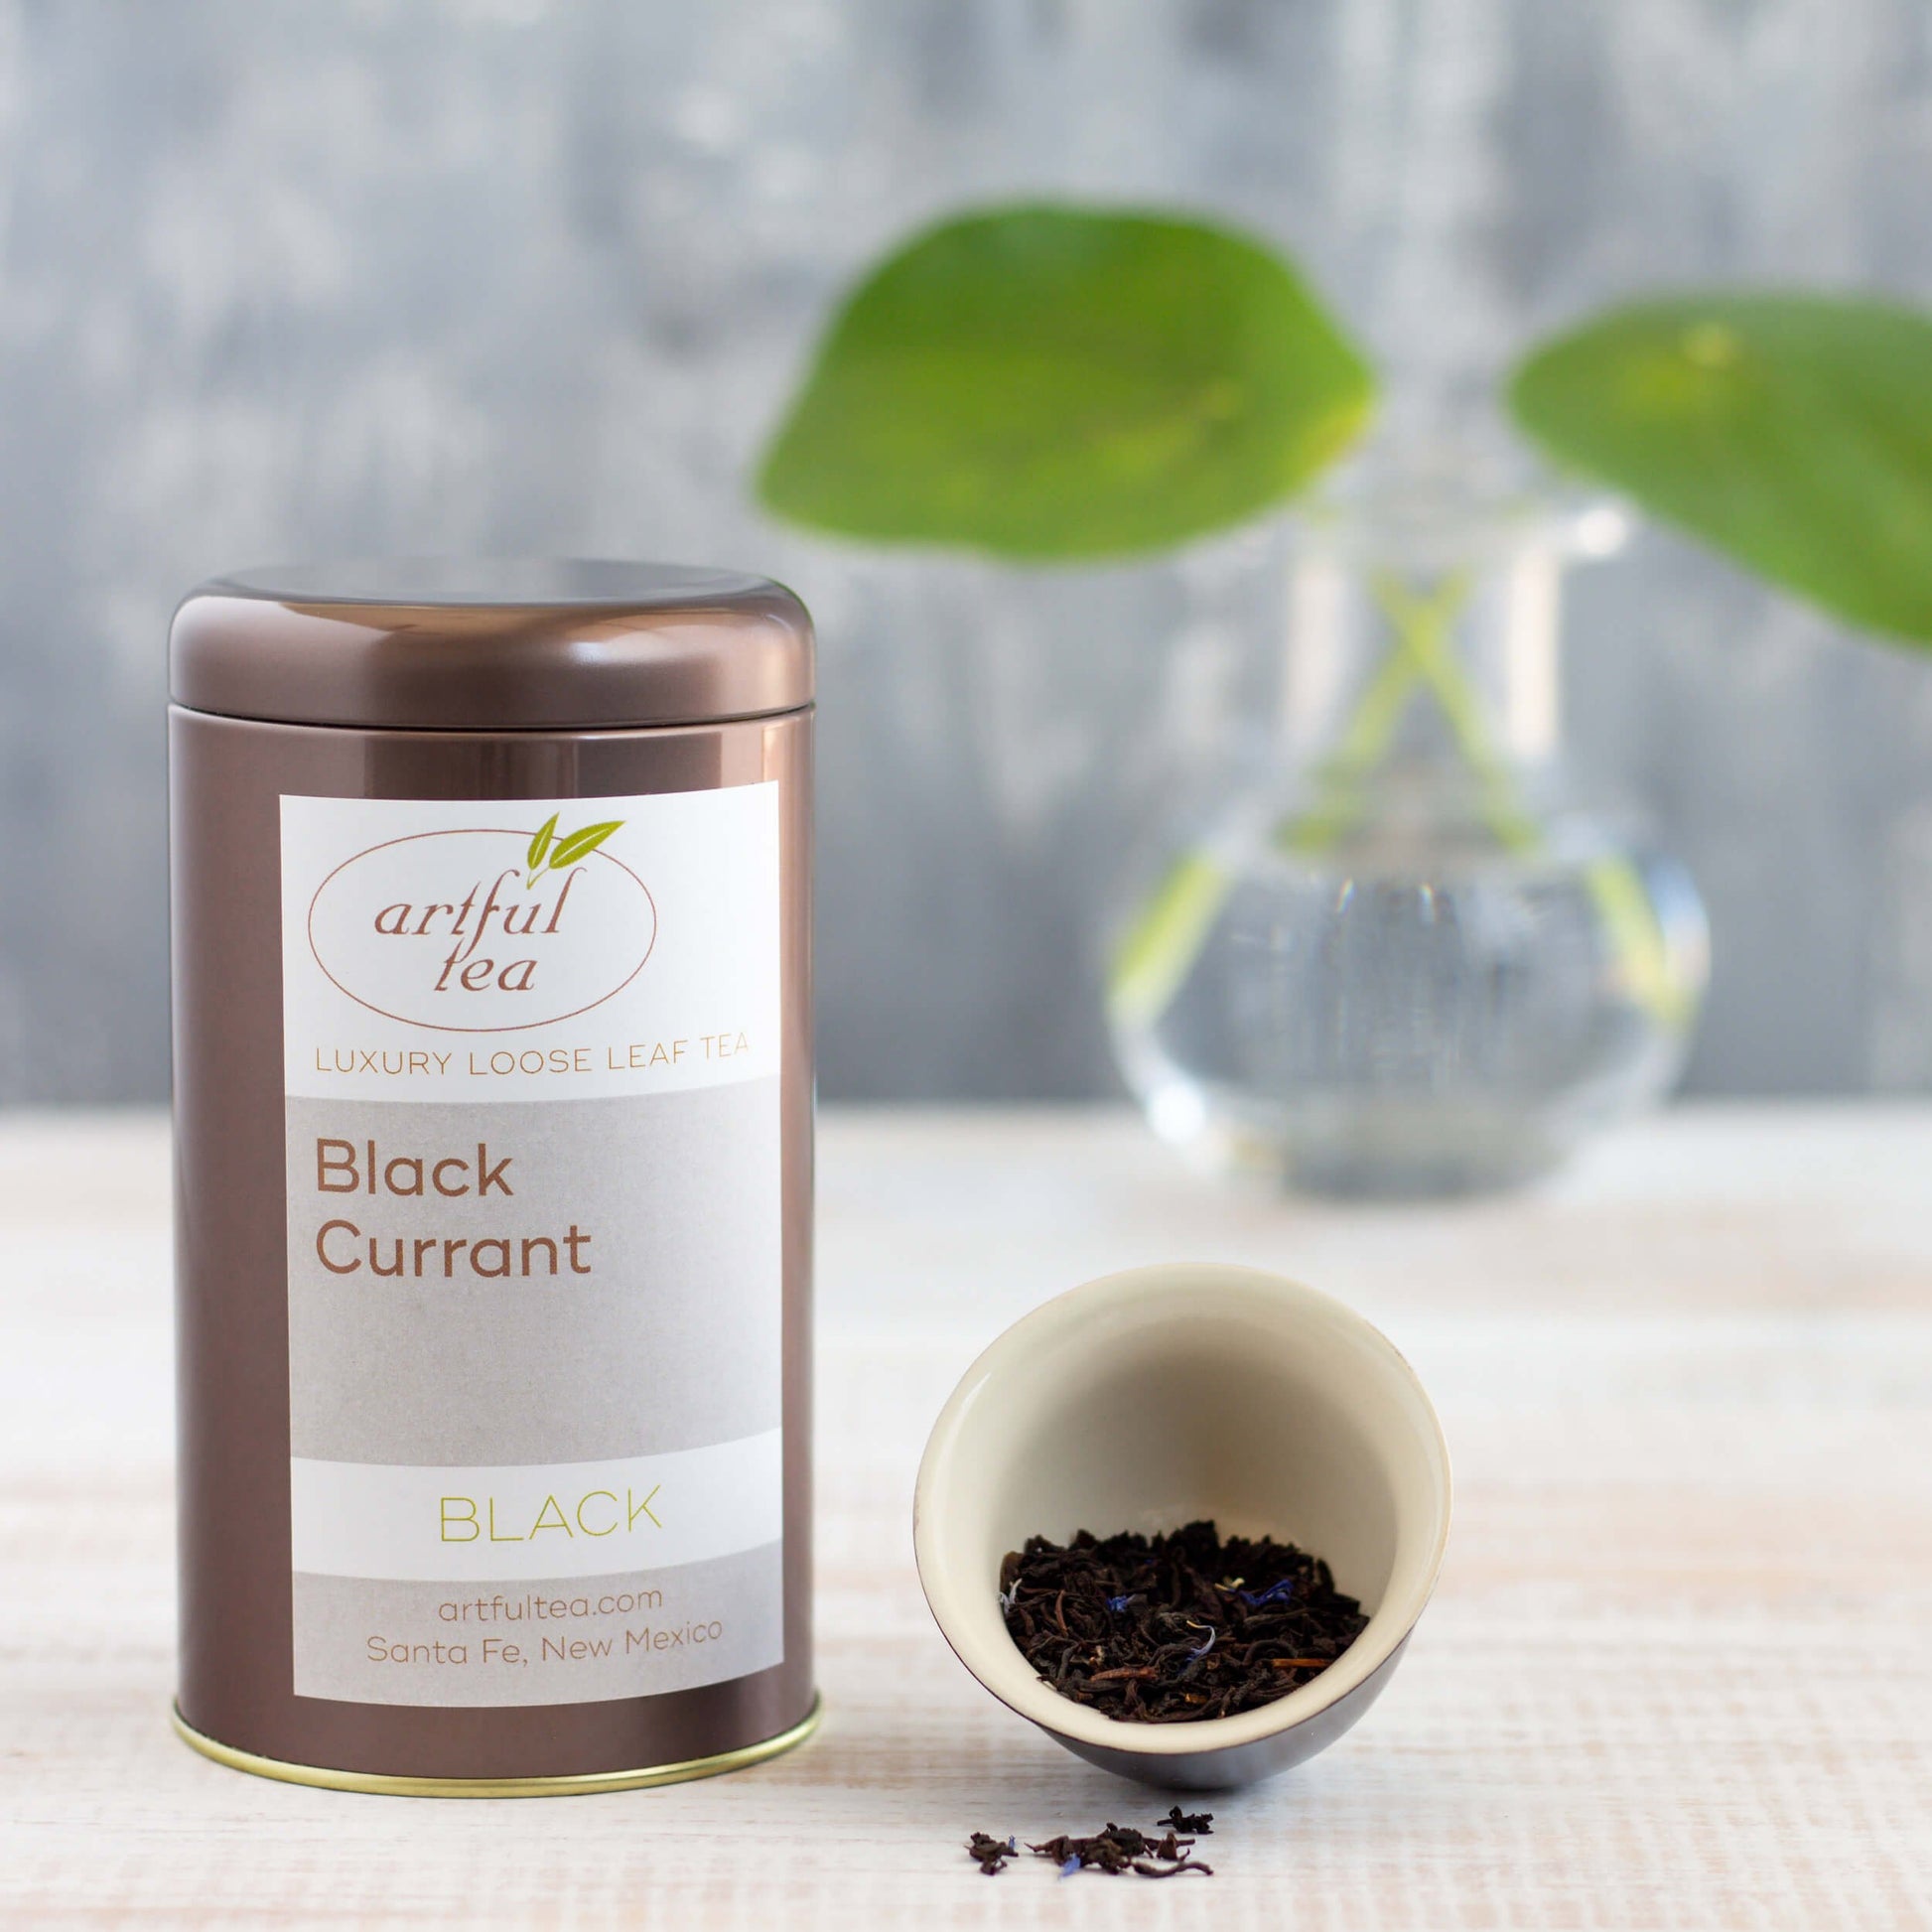 Black Currant Black Tea shown packaged in a brown tin, with a small dish of loose tea leaves nearby, and a green plant in a clear vase in the background